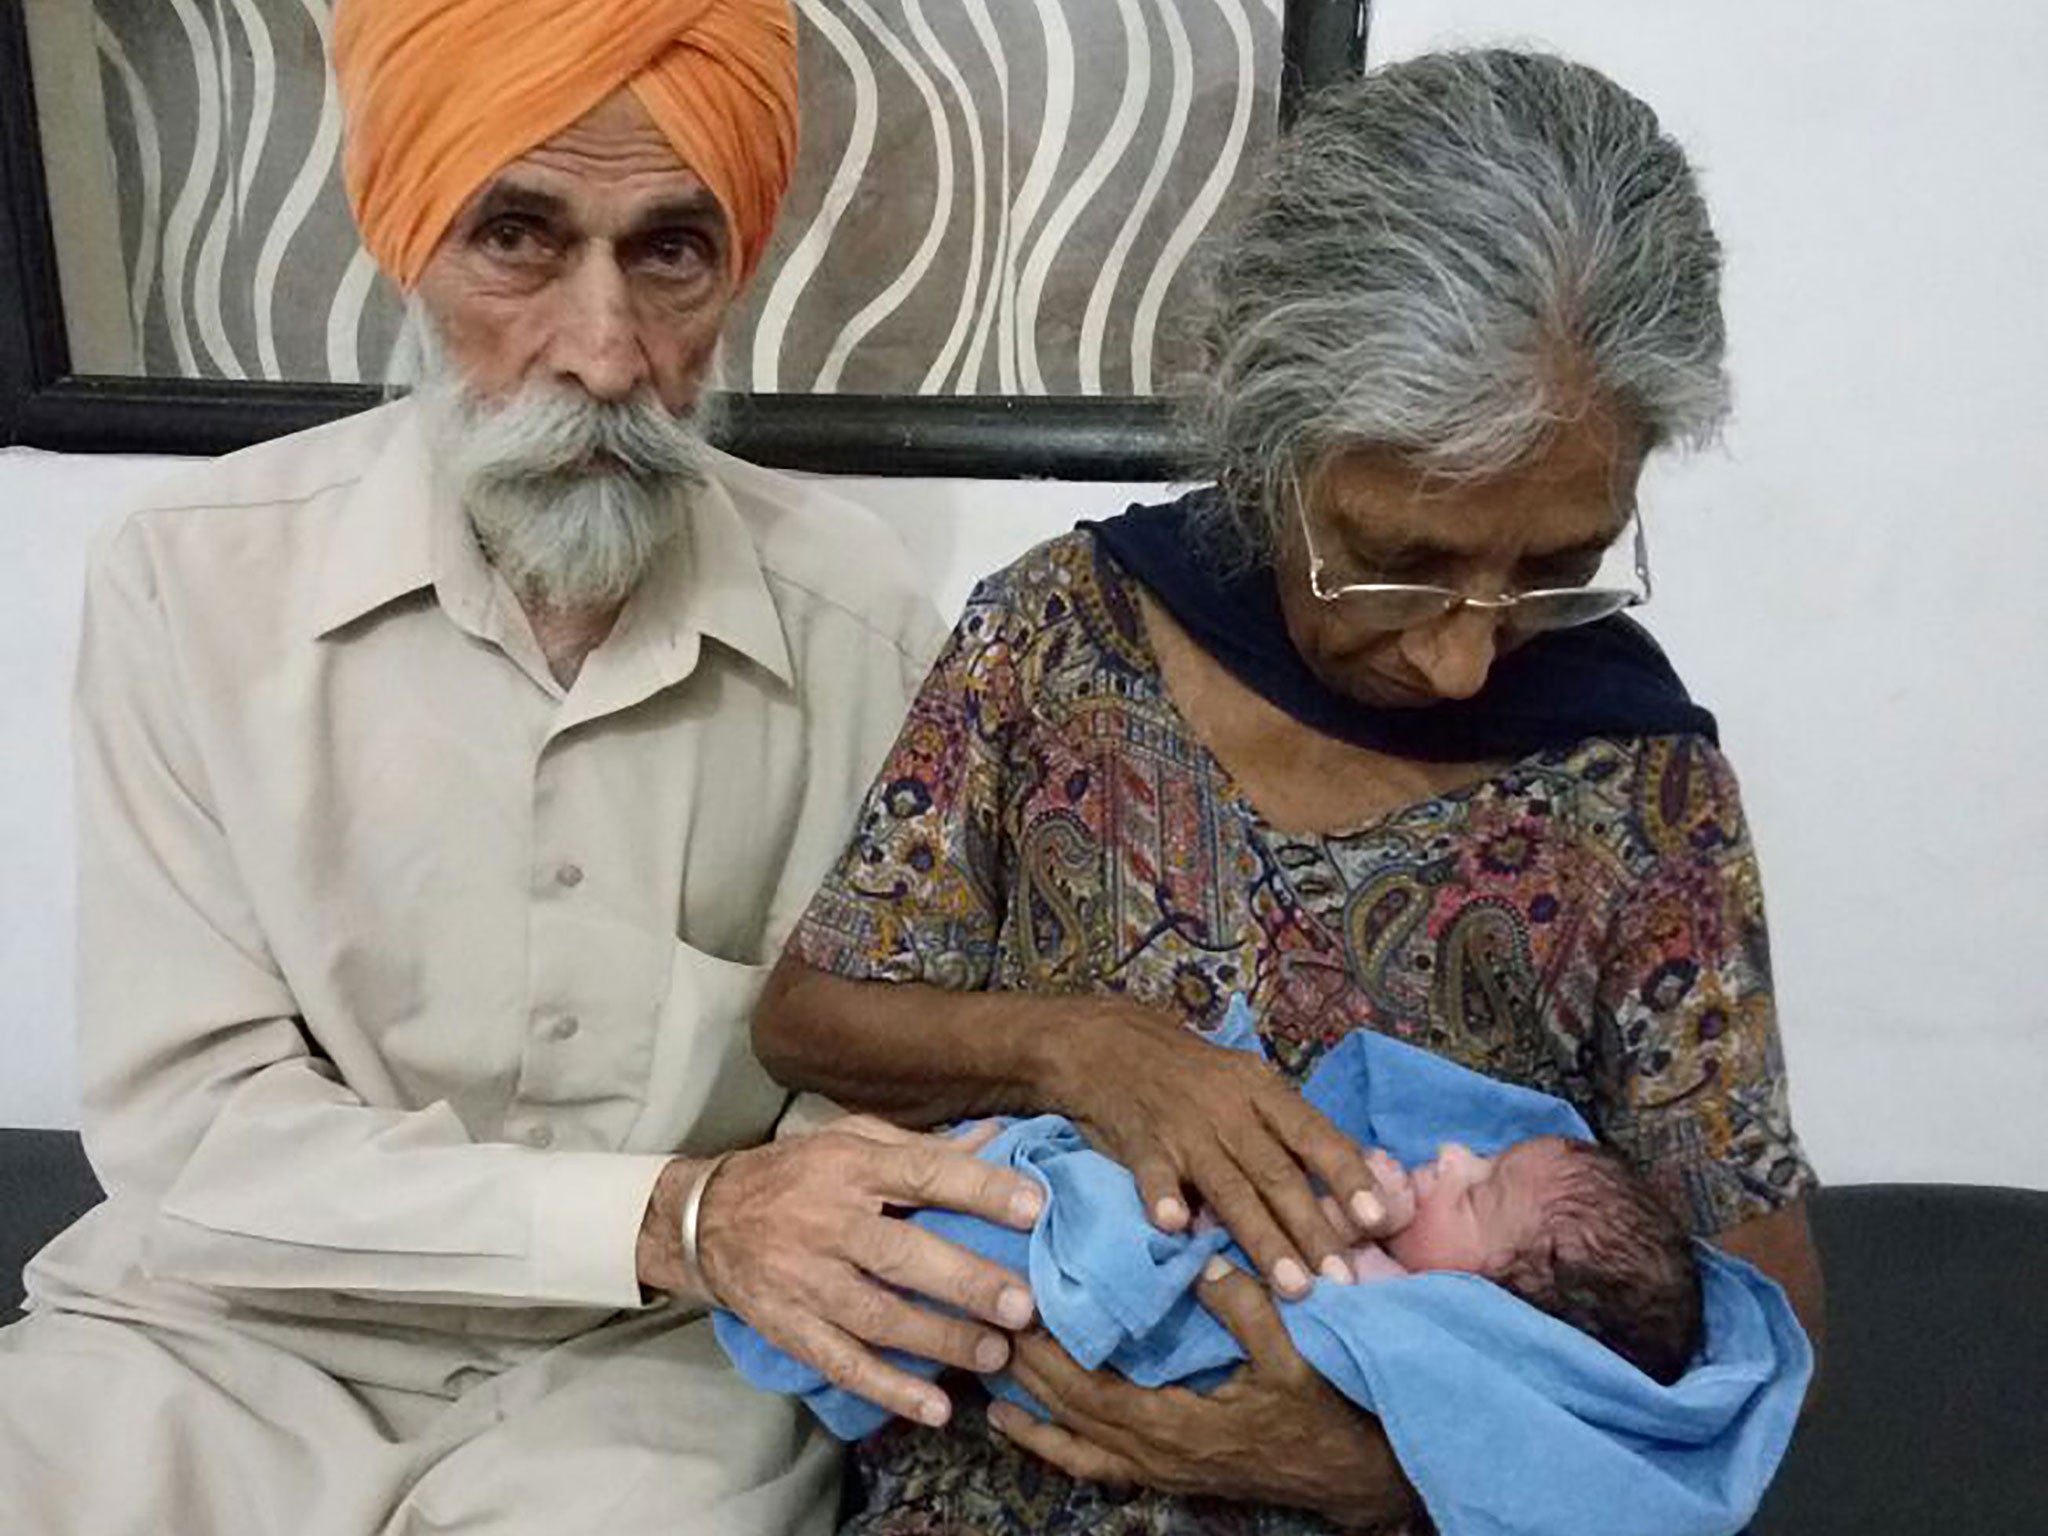 80 Year Old Woman Boy Porn - Indian woman who had baby at 72 says she has no regrets ...